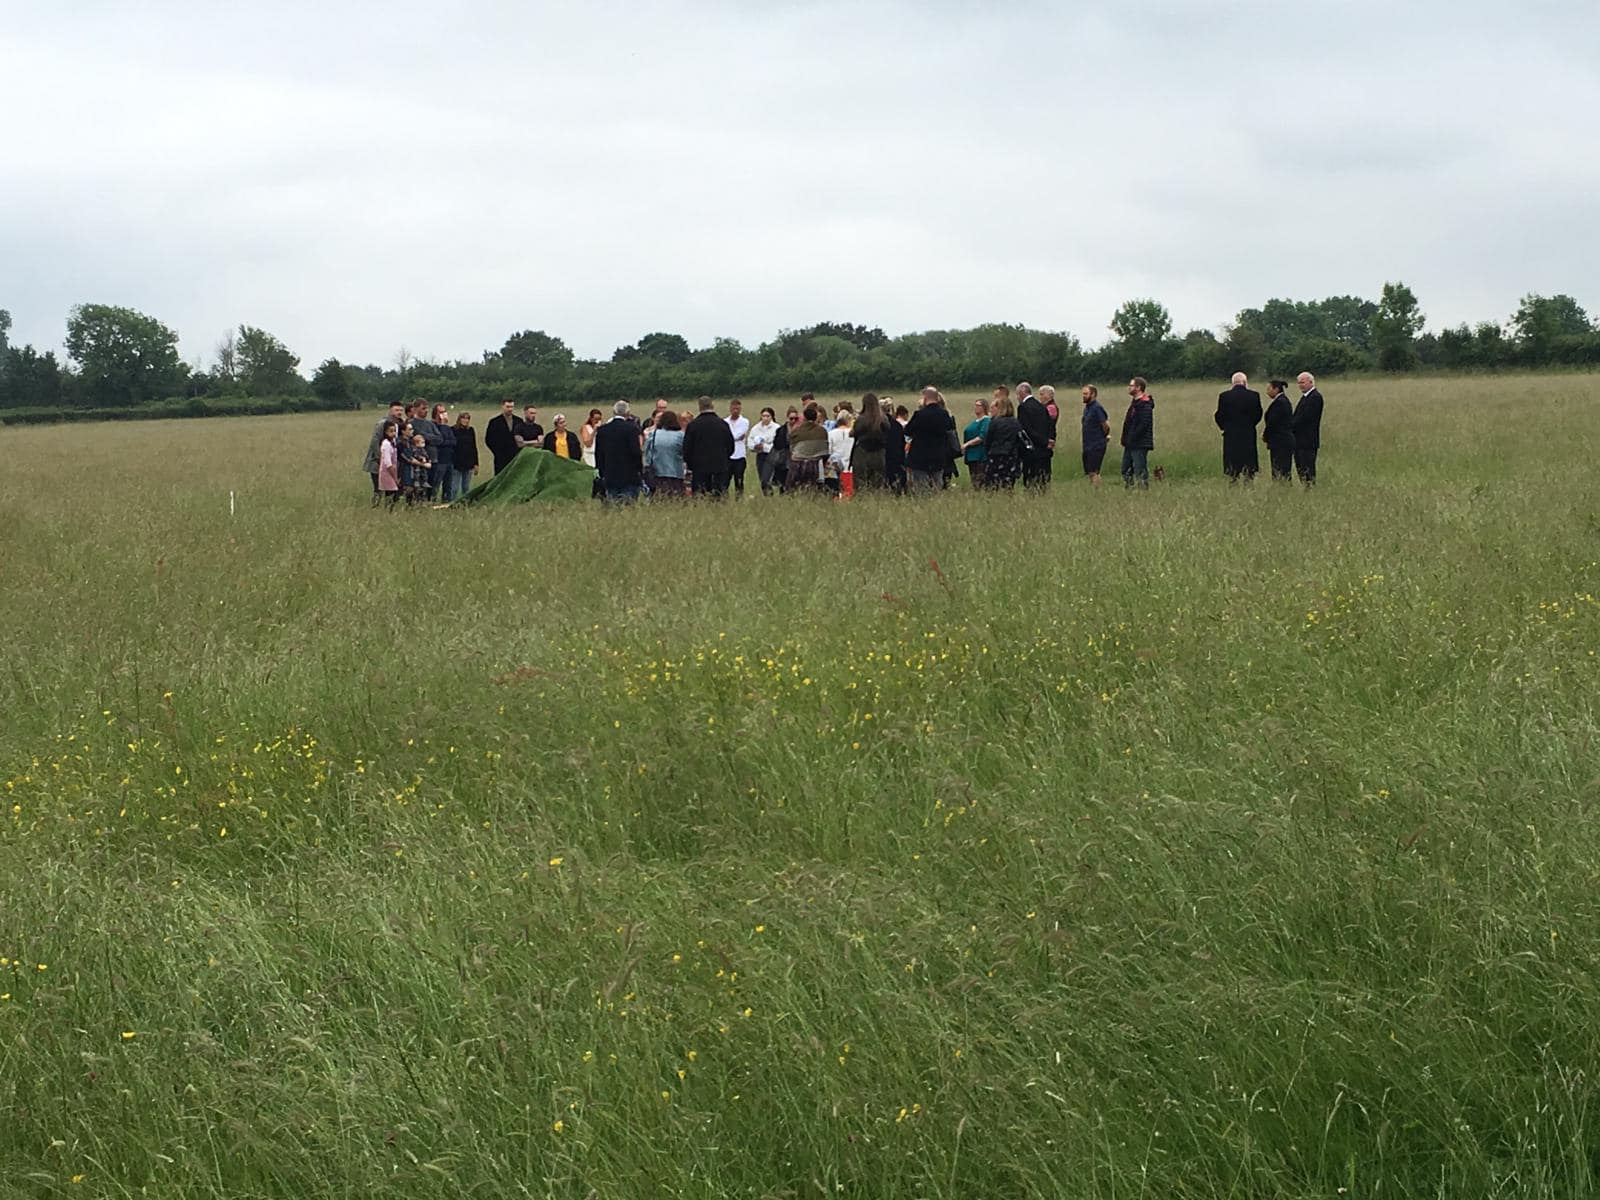 A small gathering for a funeral led by friends and family at Aylesbury Vale natural burial meadow.